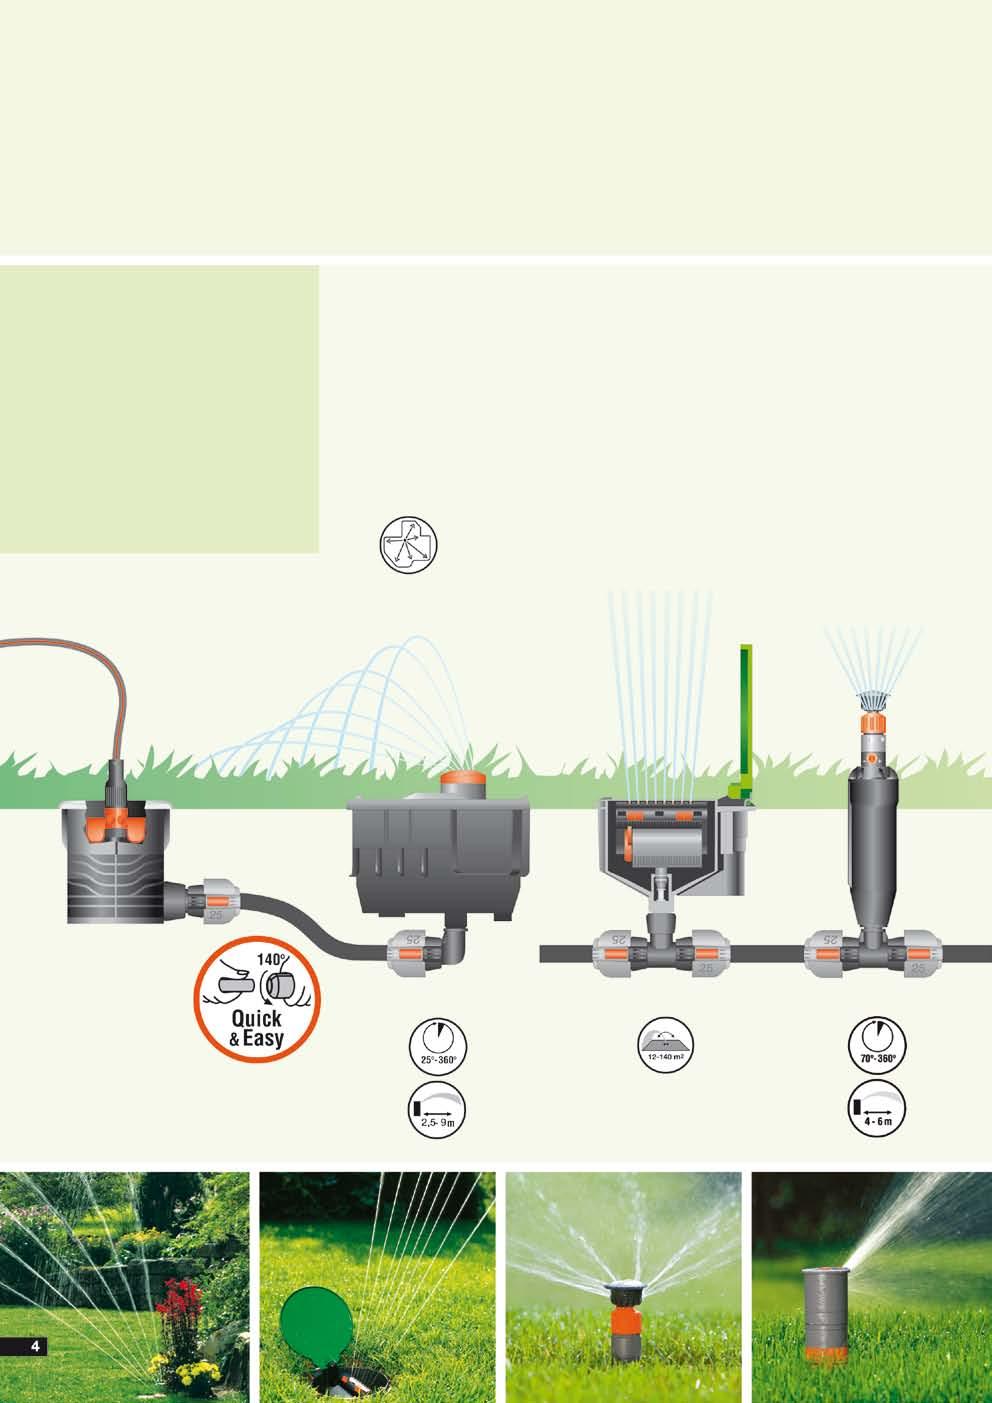 GARDENA Sprinklersystem Easy watering using pop-up sprinklers The pop-up sprinklers installed below ground pop-up as if by magic when it is time to water your garden.